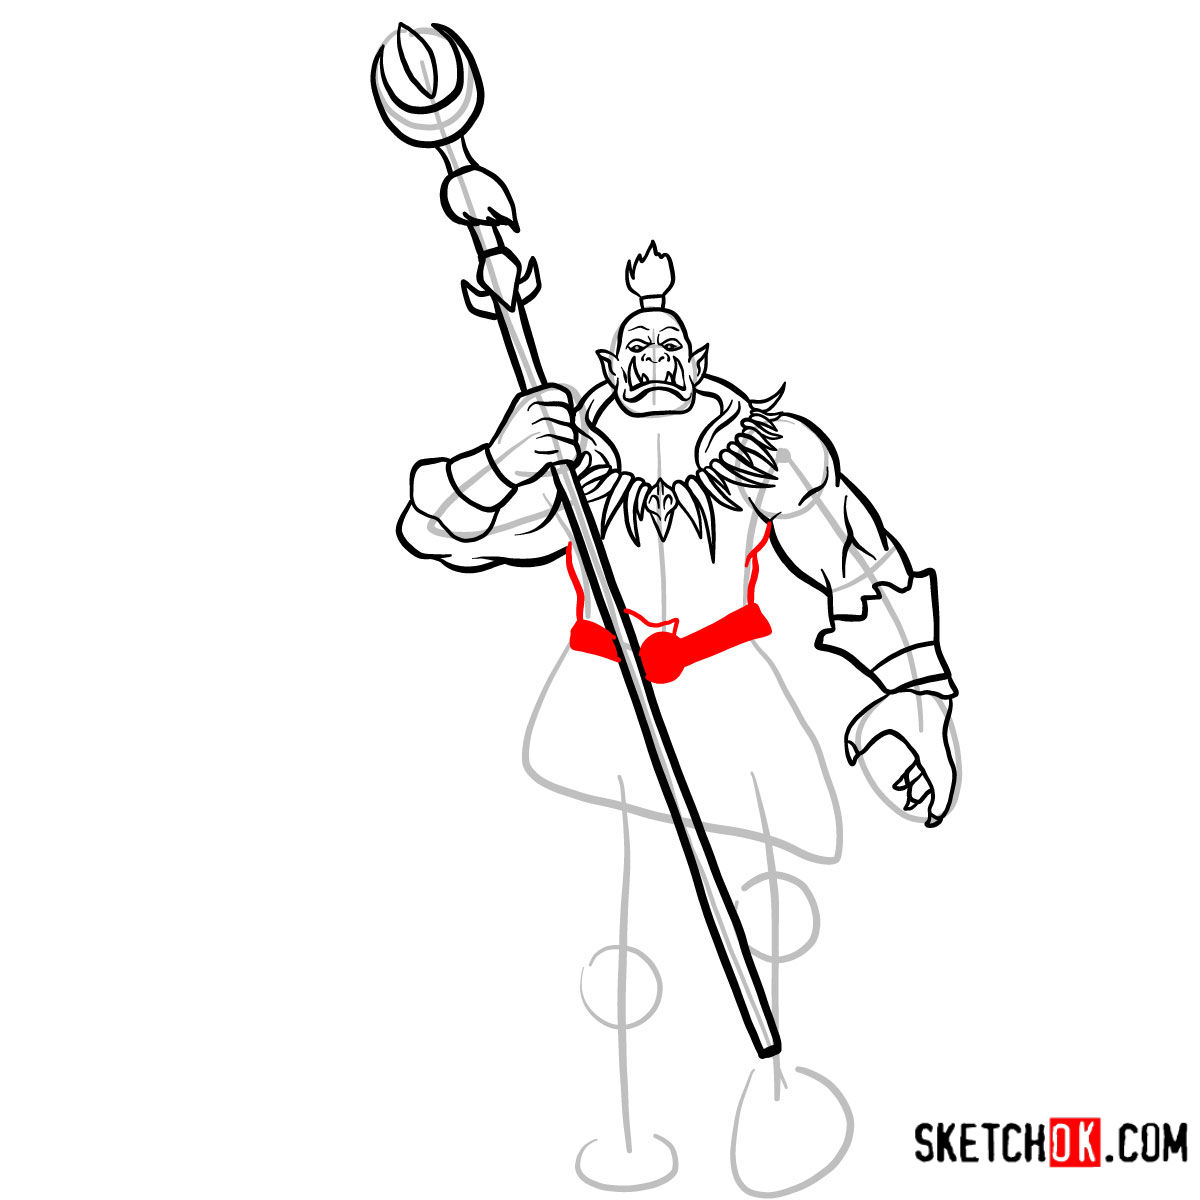 How to draw Ner'zhul | World of Warcraft - step 11